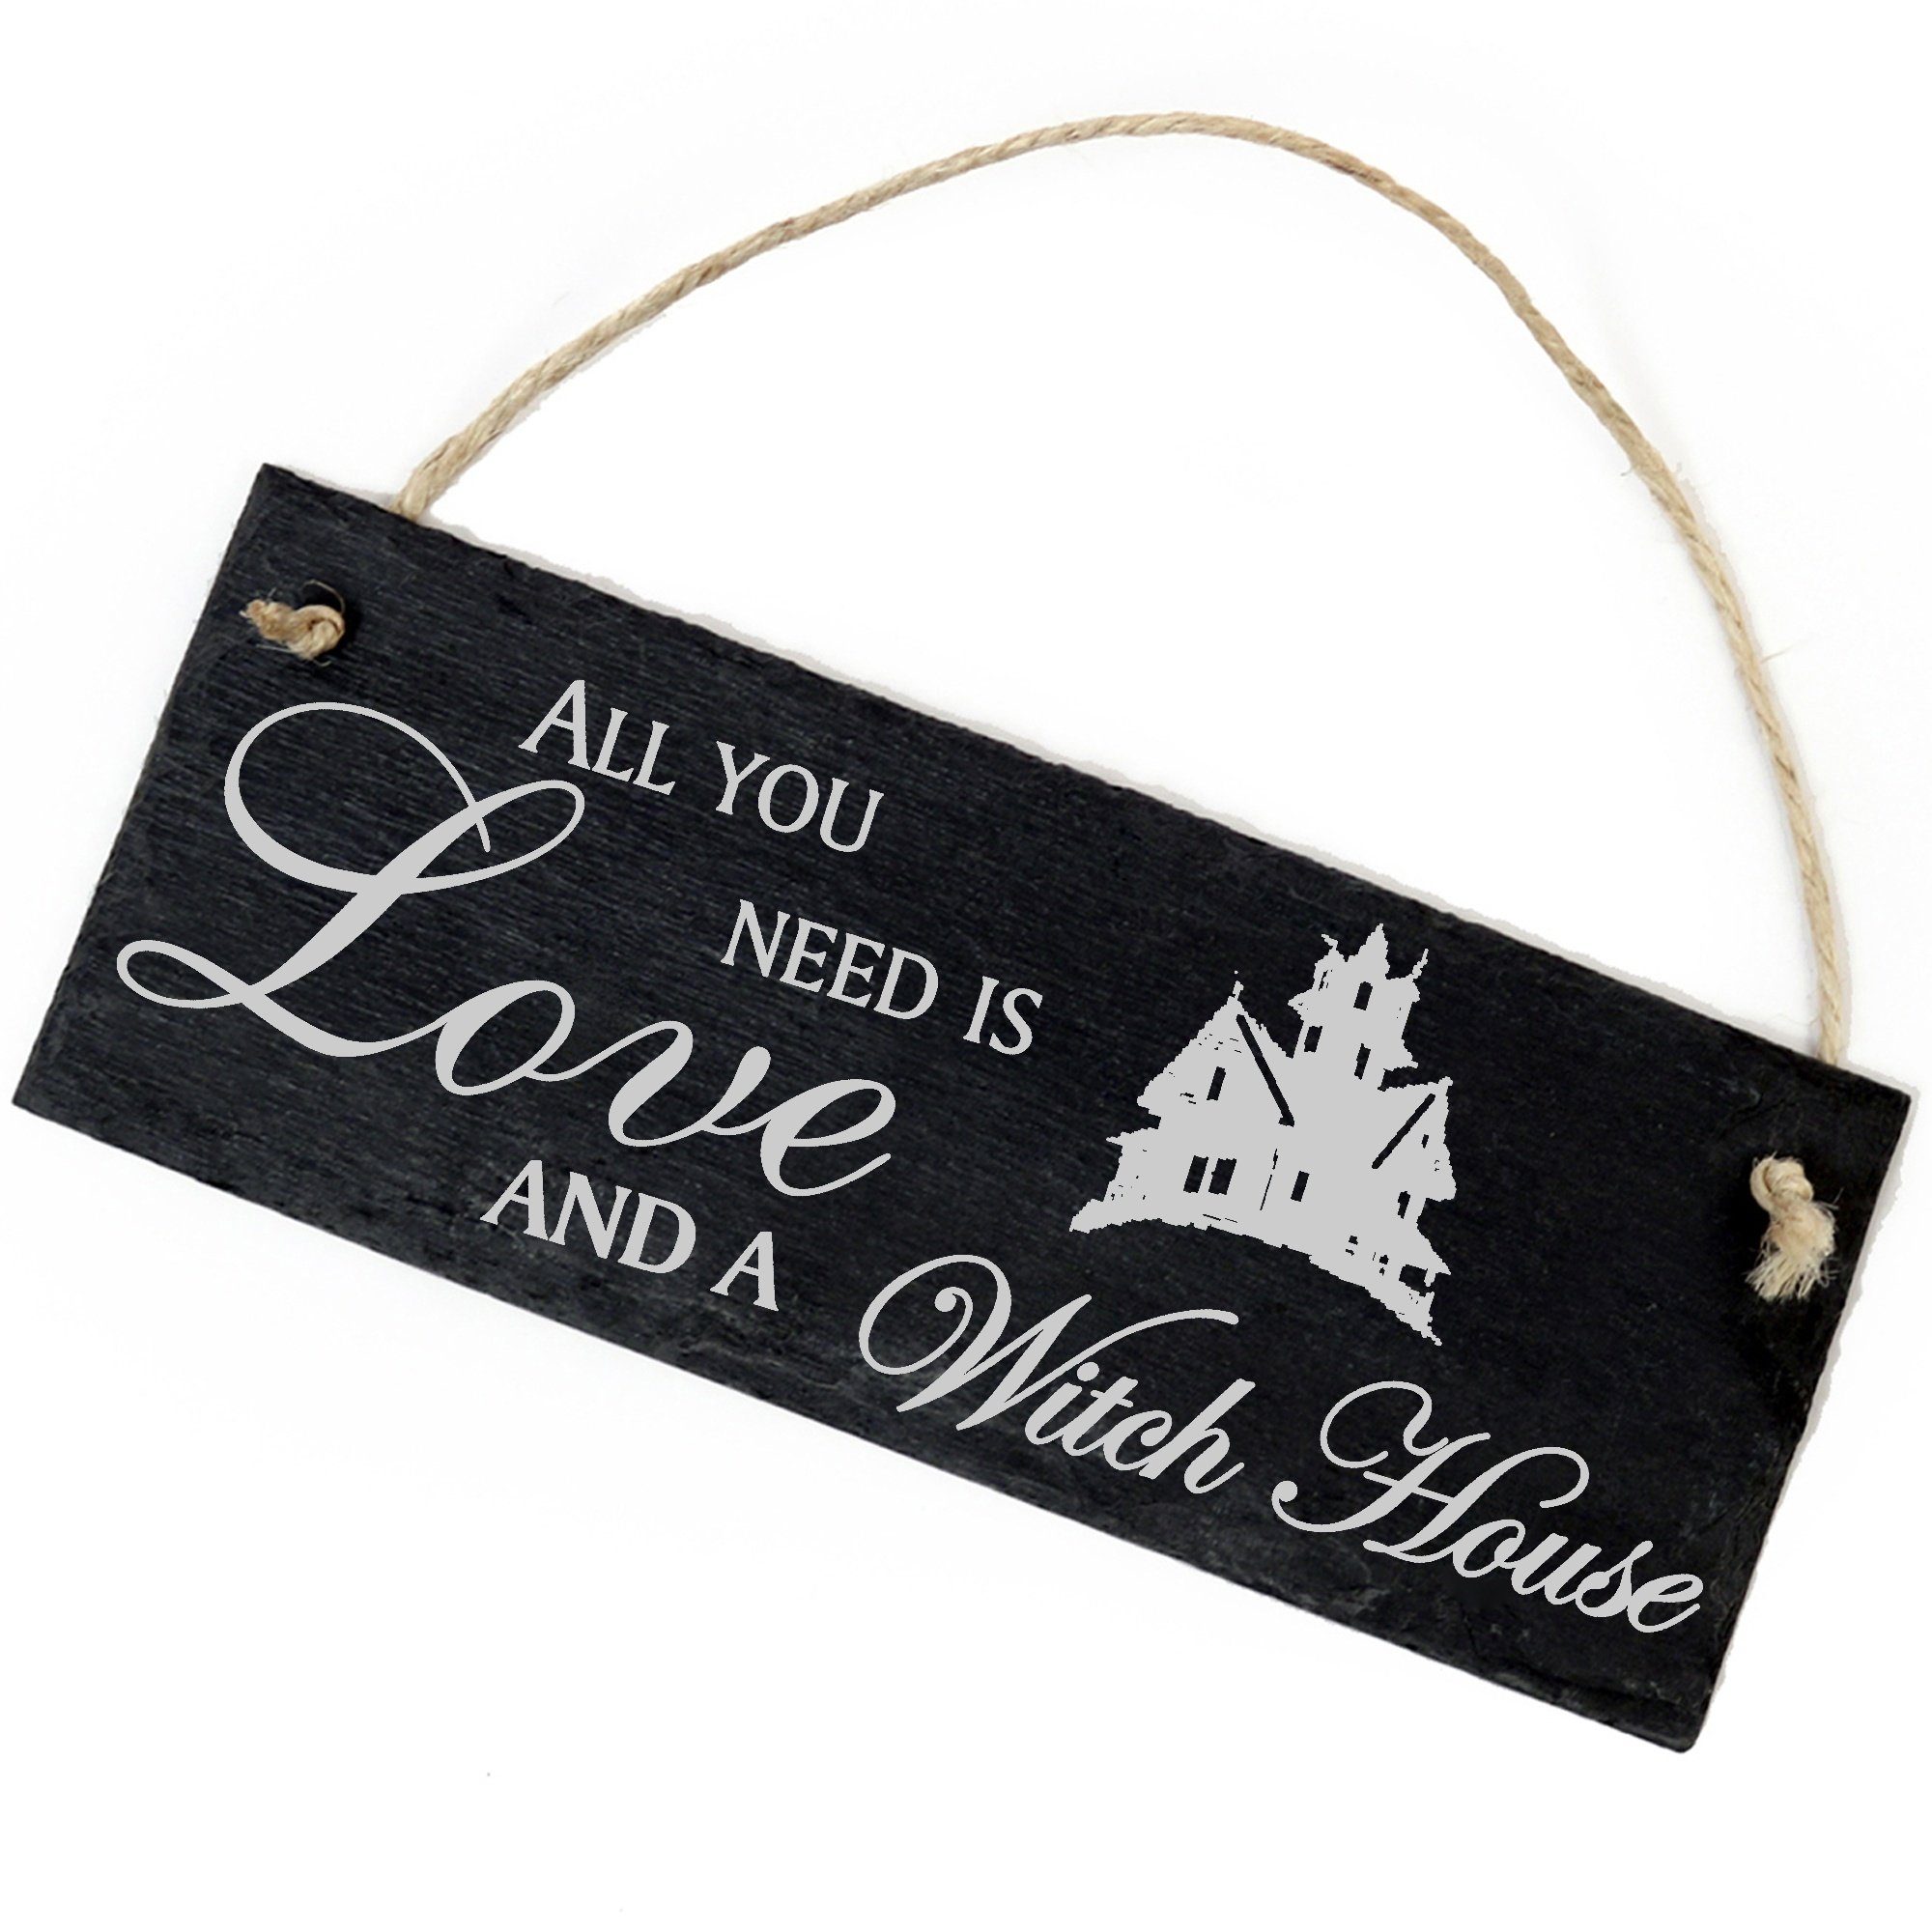 Dekolando Hängedekoration Hexenhaus 22x8cm All you need is Love and a Witch House